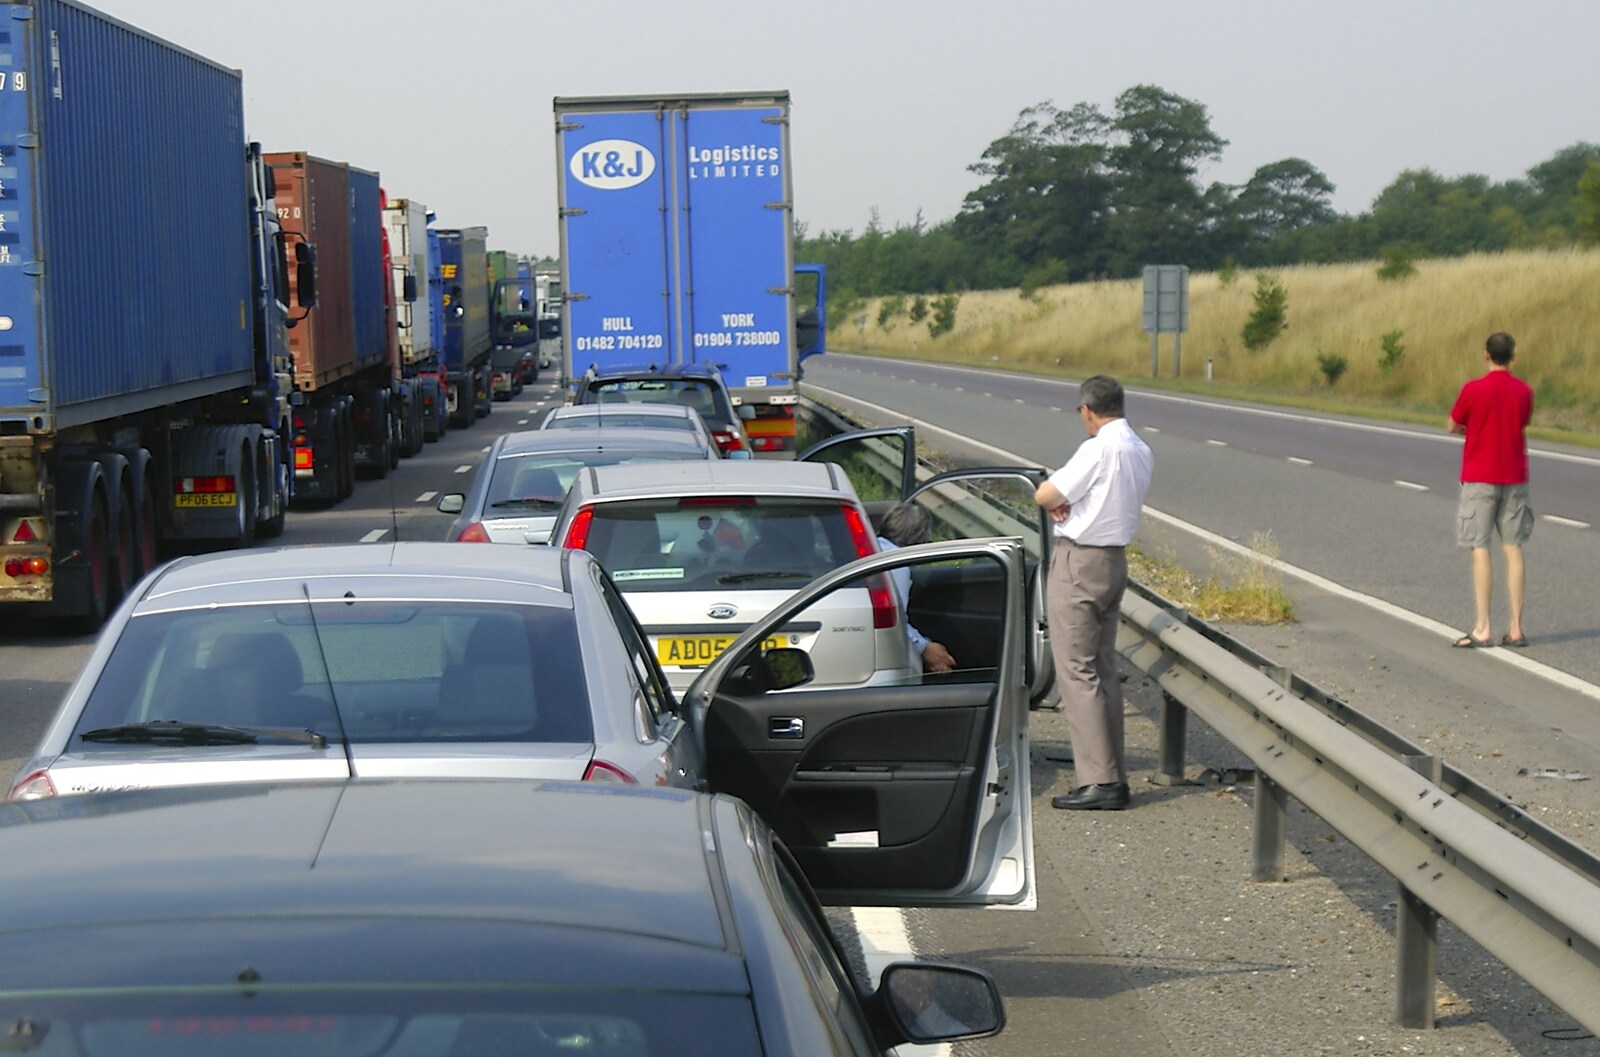 Motionless traffic on the A14 from Shakespeare at St. John's, Parker's Piece and the A14's Worst Day - 17th July 2006